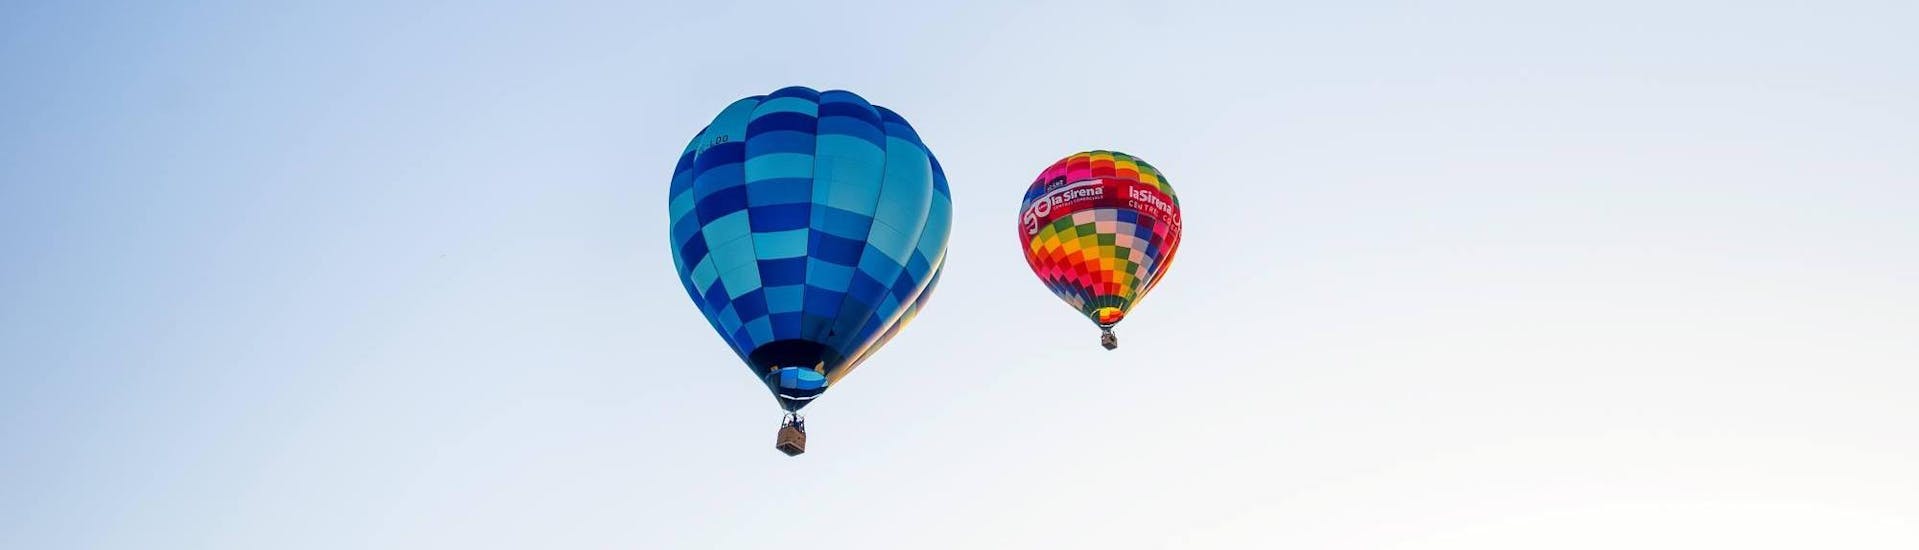 Two hot air balloons from Ibiza en Globo float several metres in the sky.